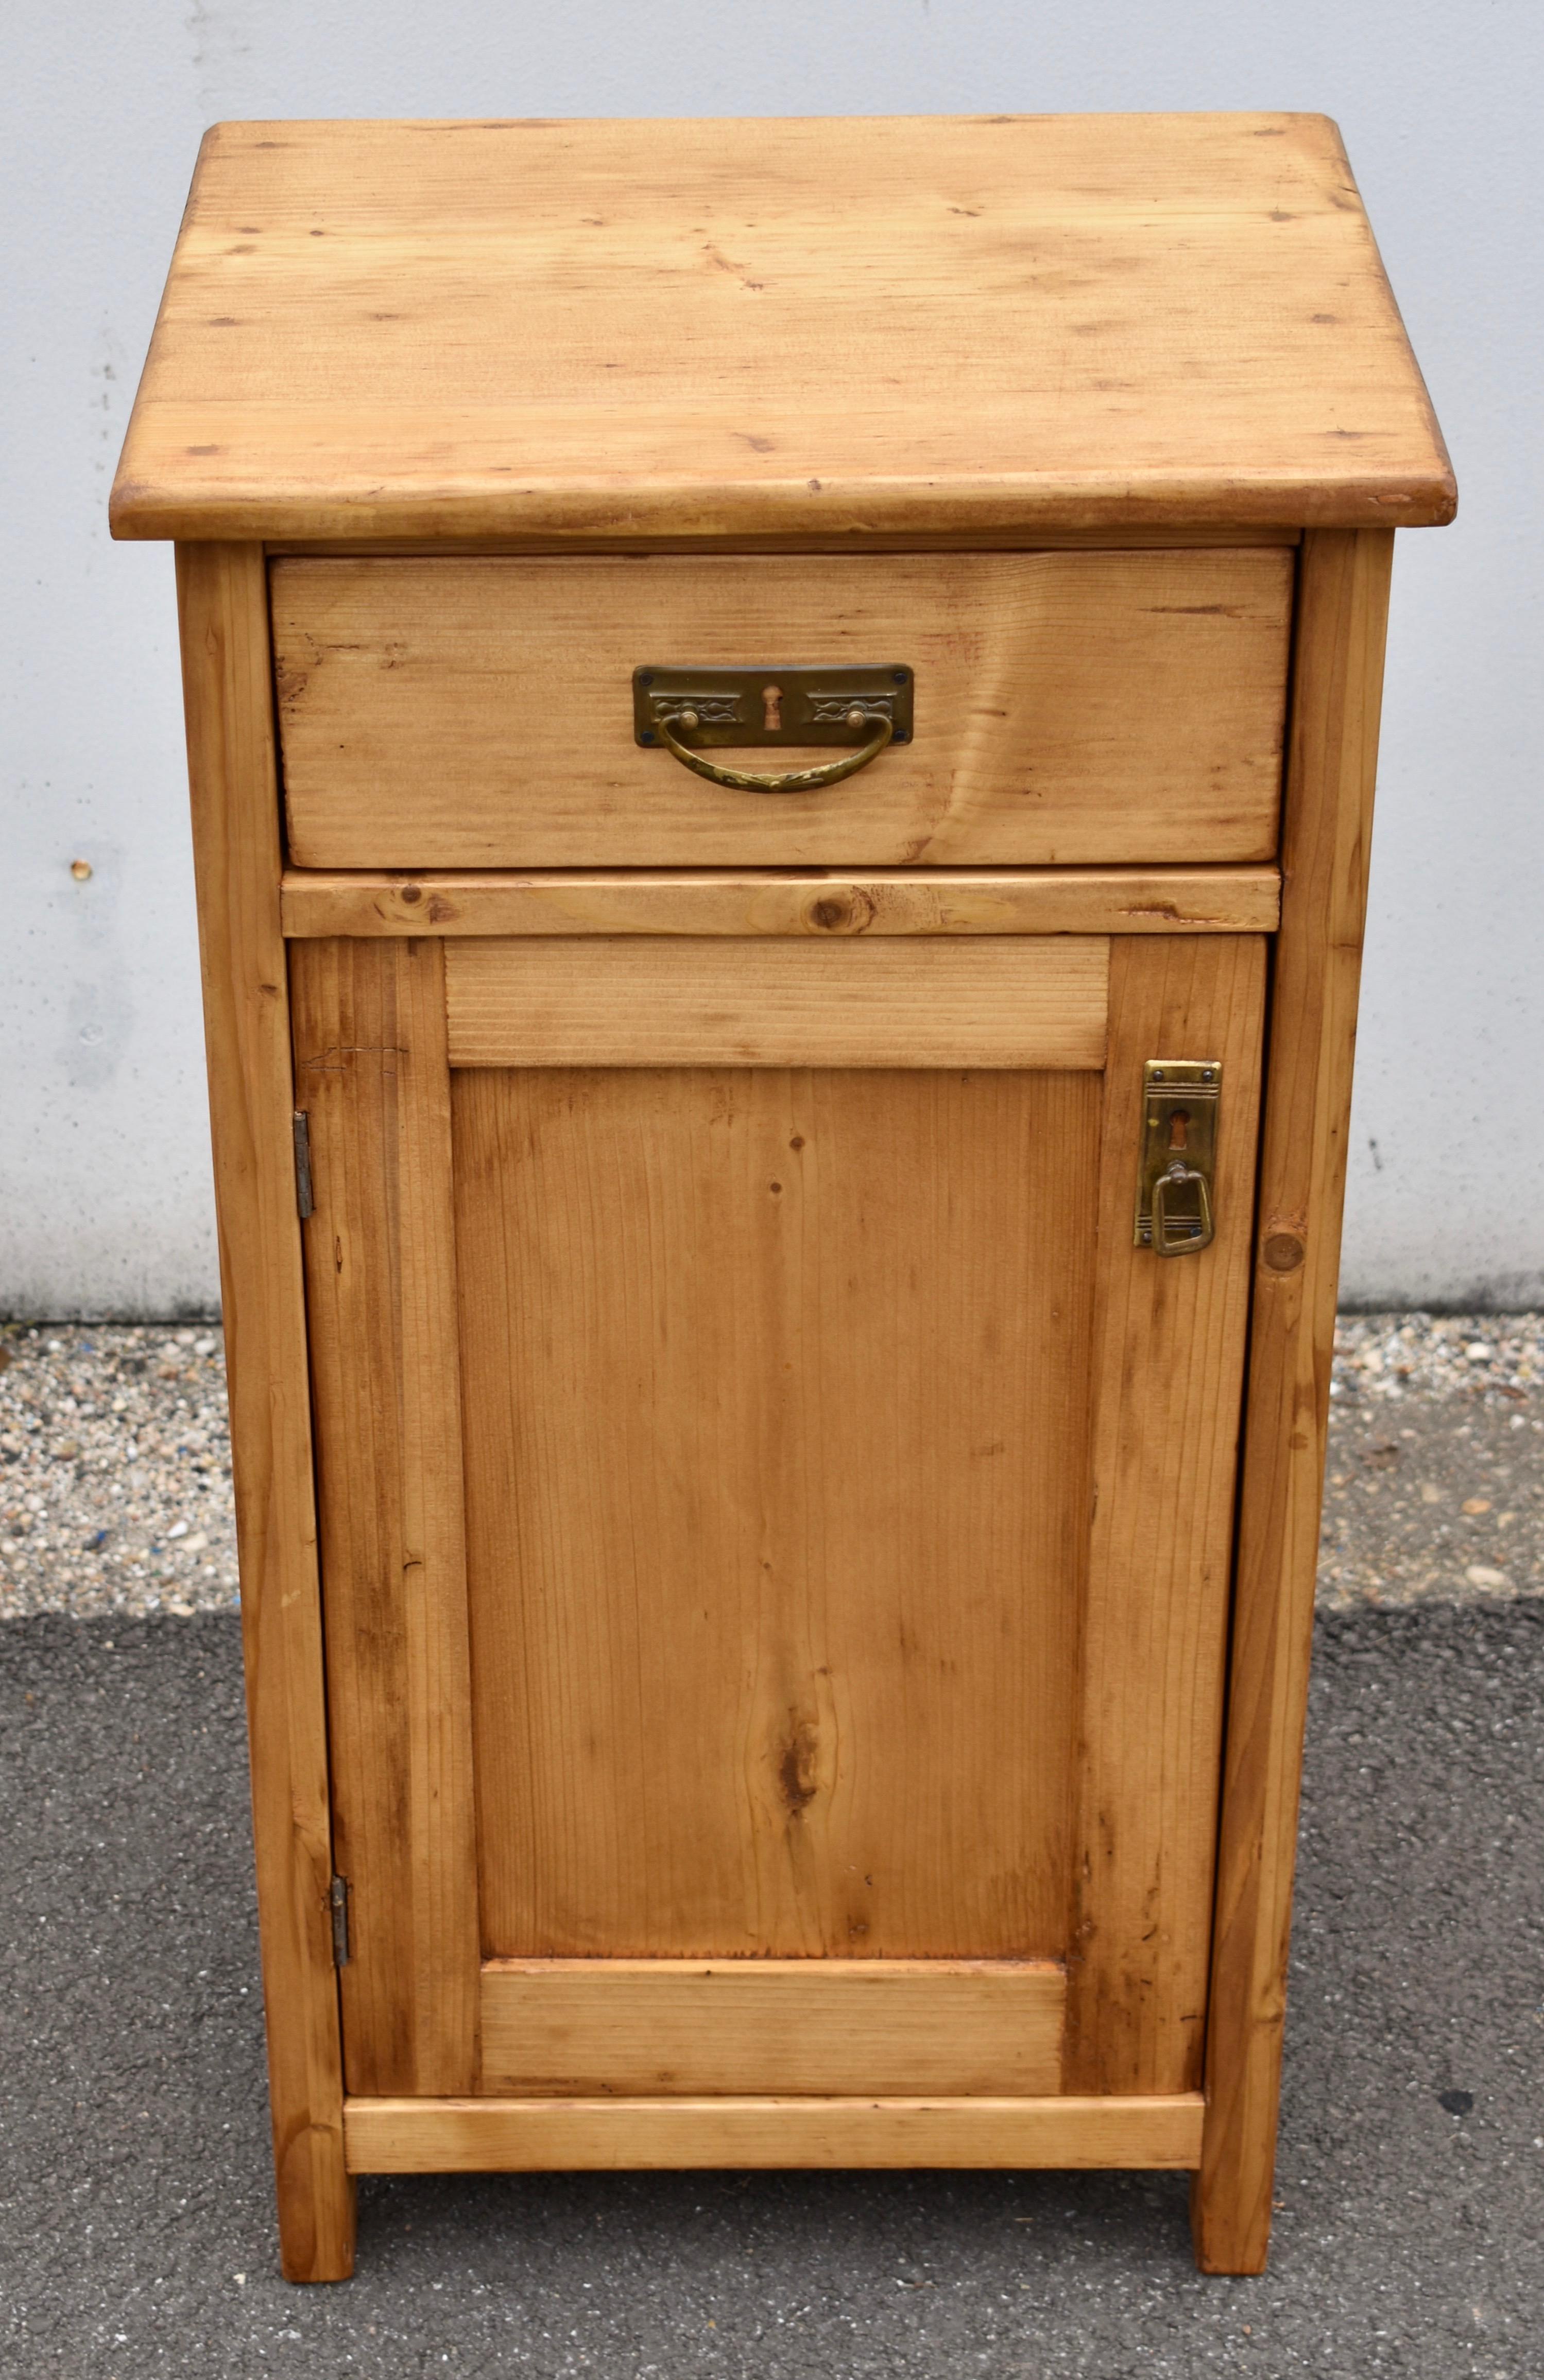 This handsome nightstand has great lines and a lovely color.  It features a flat paneled door and a hand-cut dovetailed drawer.  There is a single shelf in the interior.  Useful for storage in the office or guest room.
   
